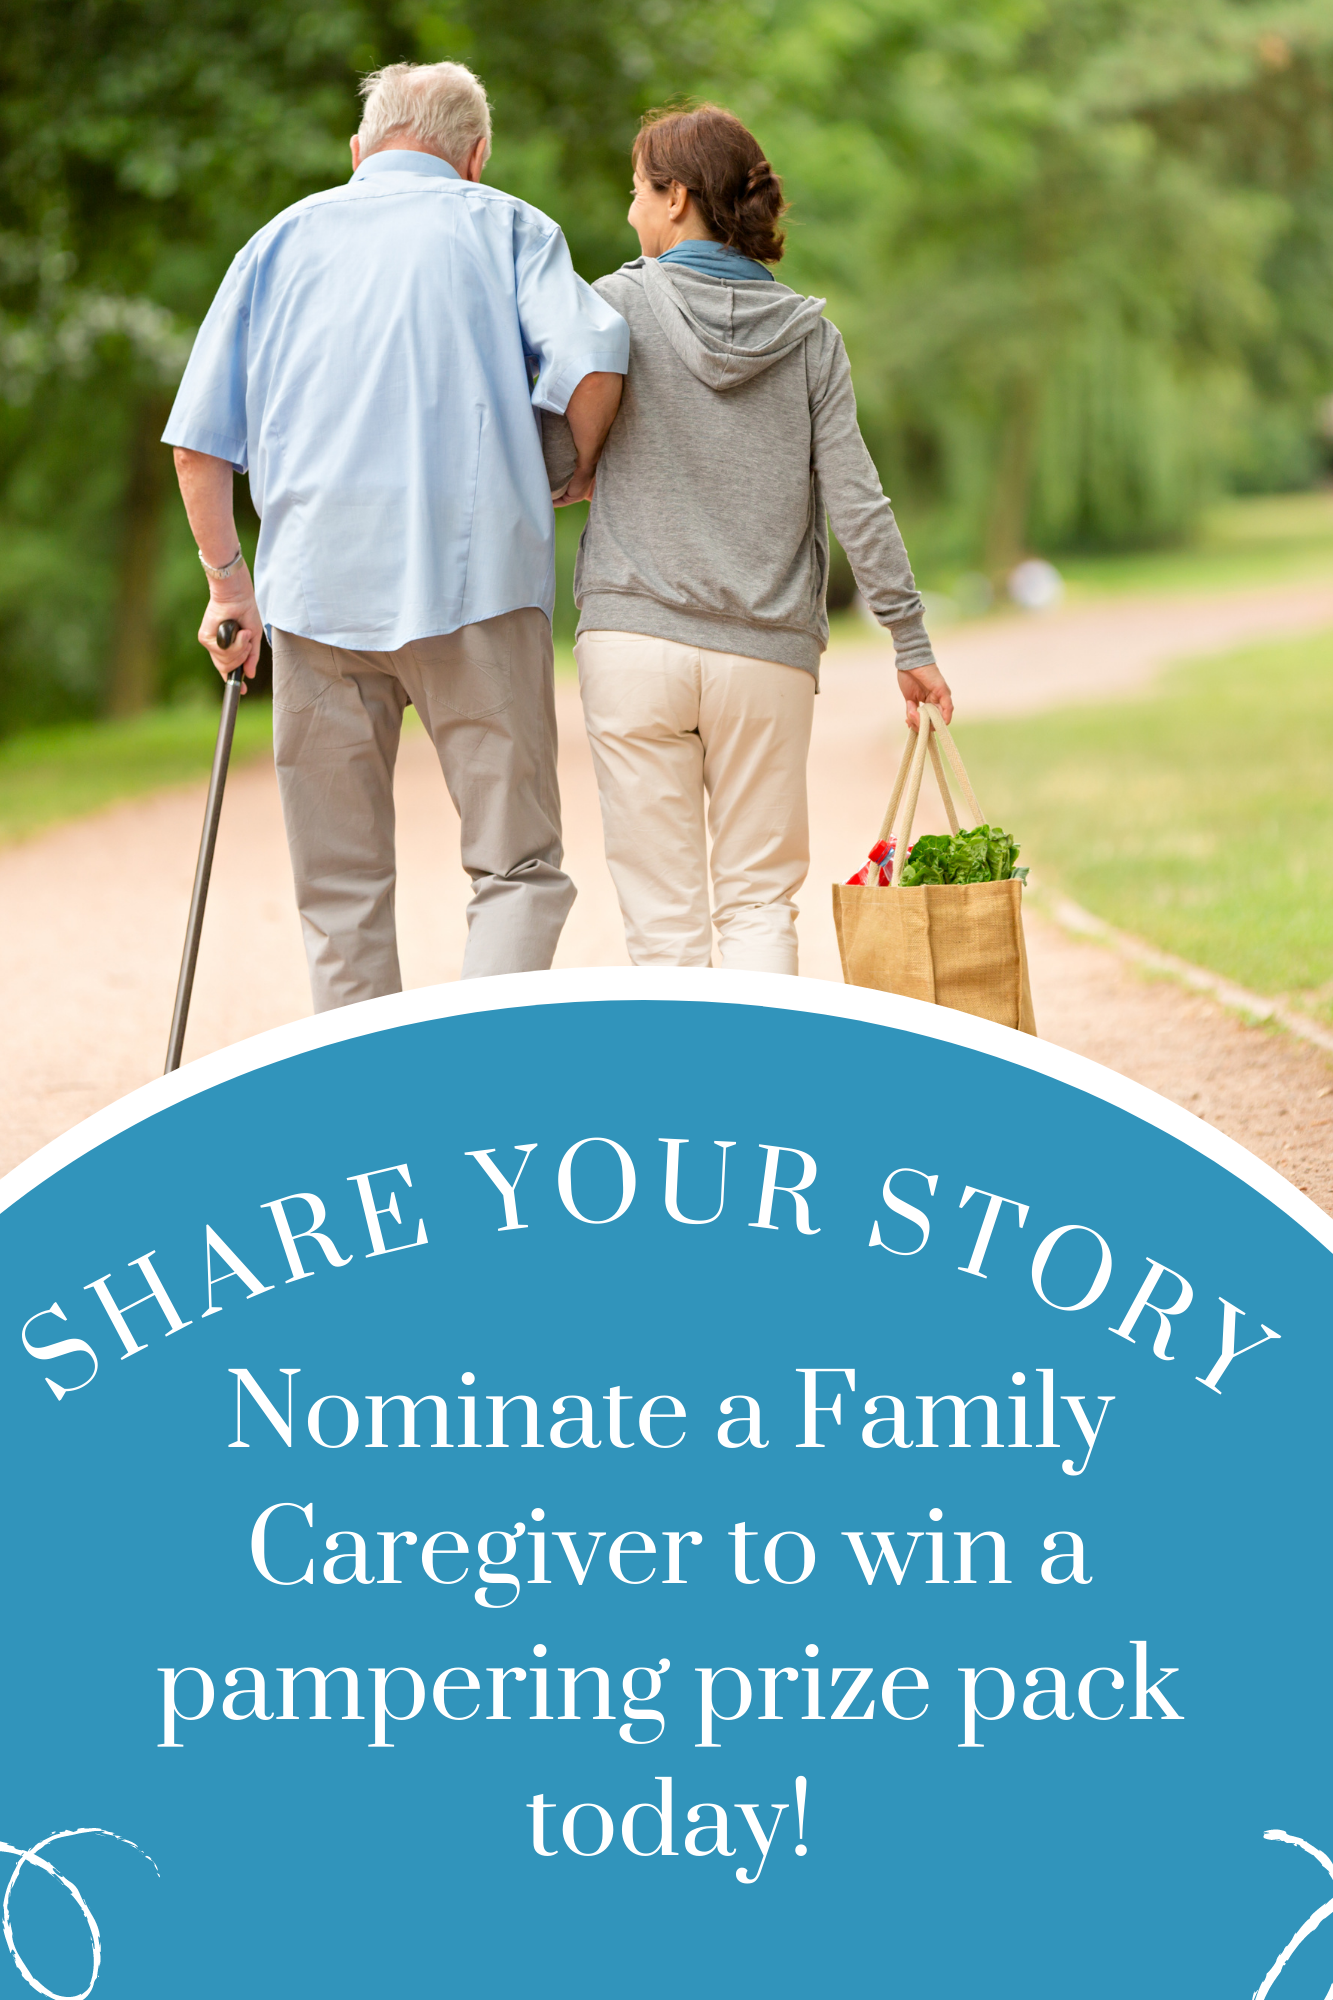 Family caregiver month giveaway announcment photo of woman helping older man with groceries.